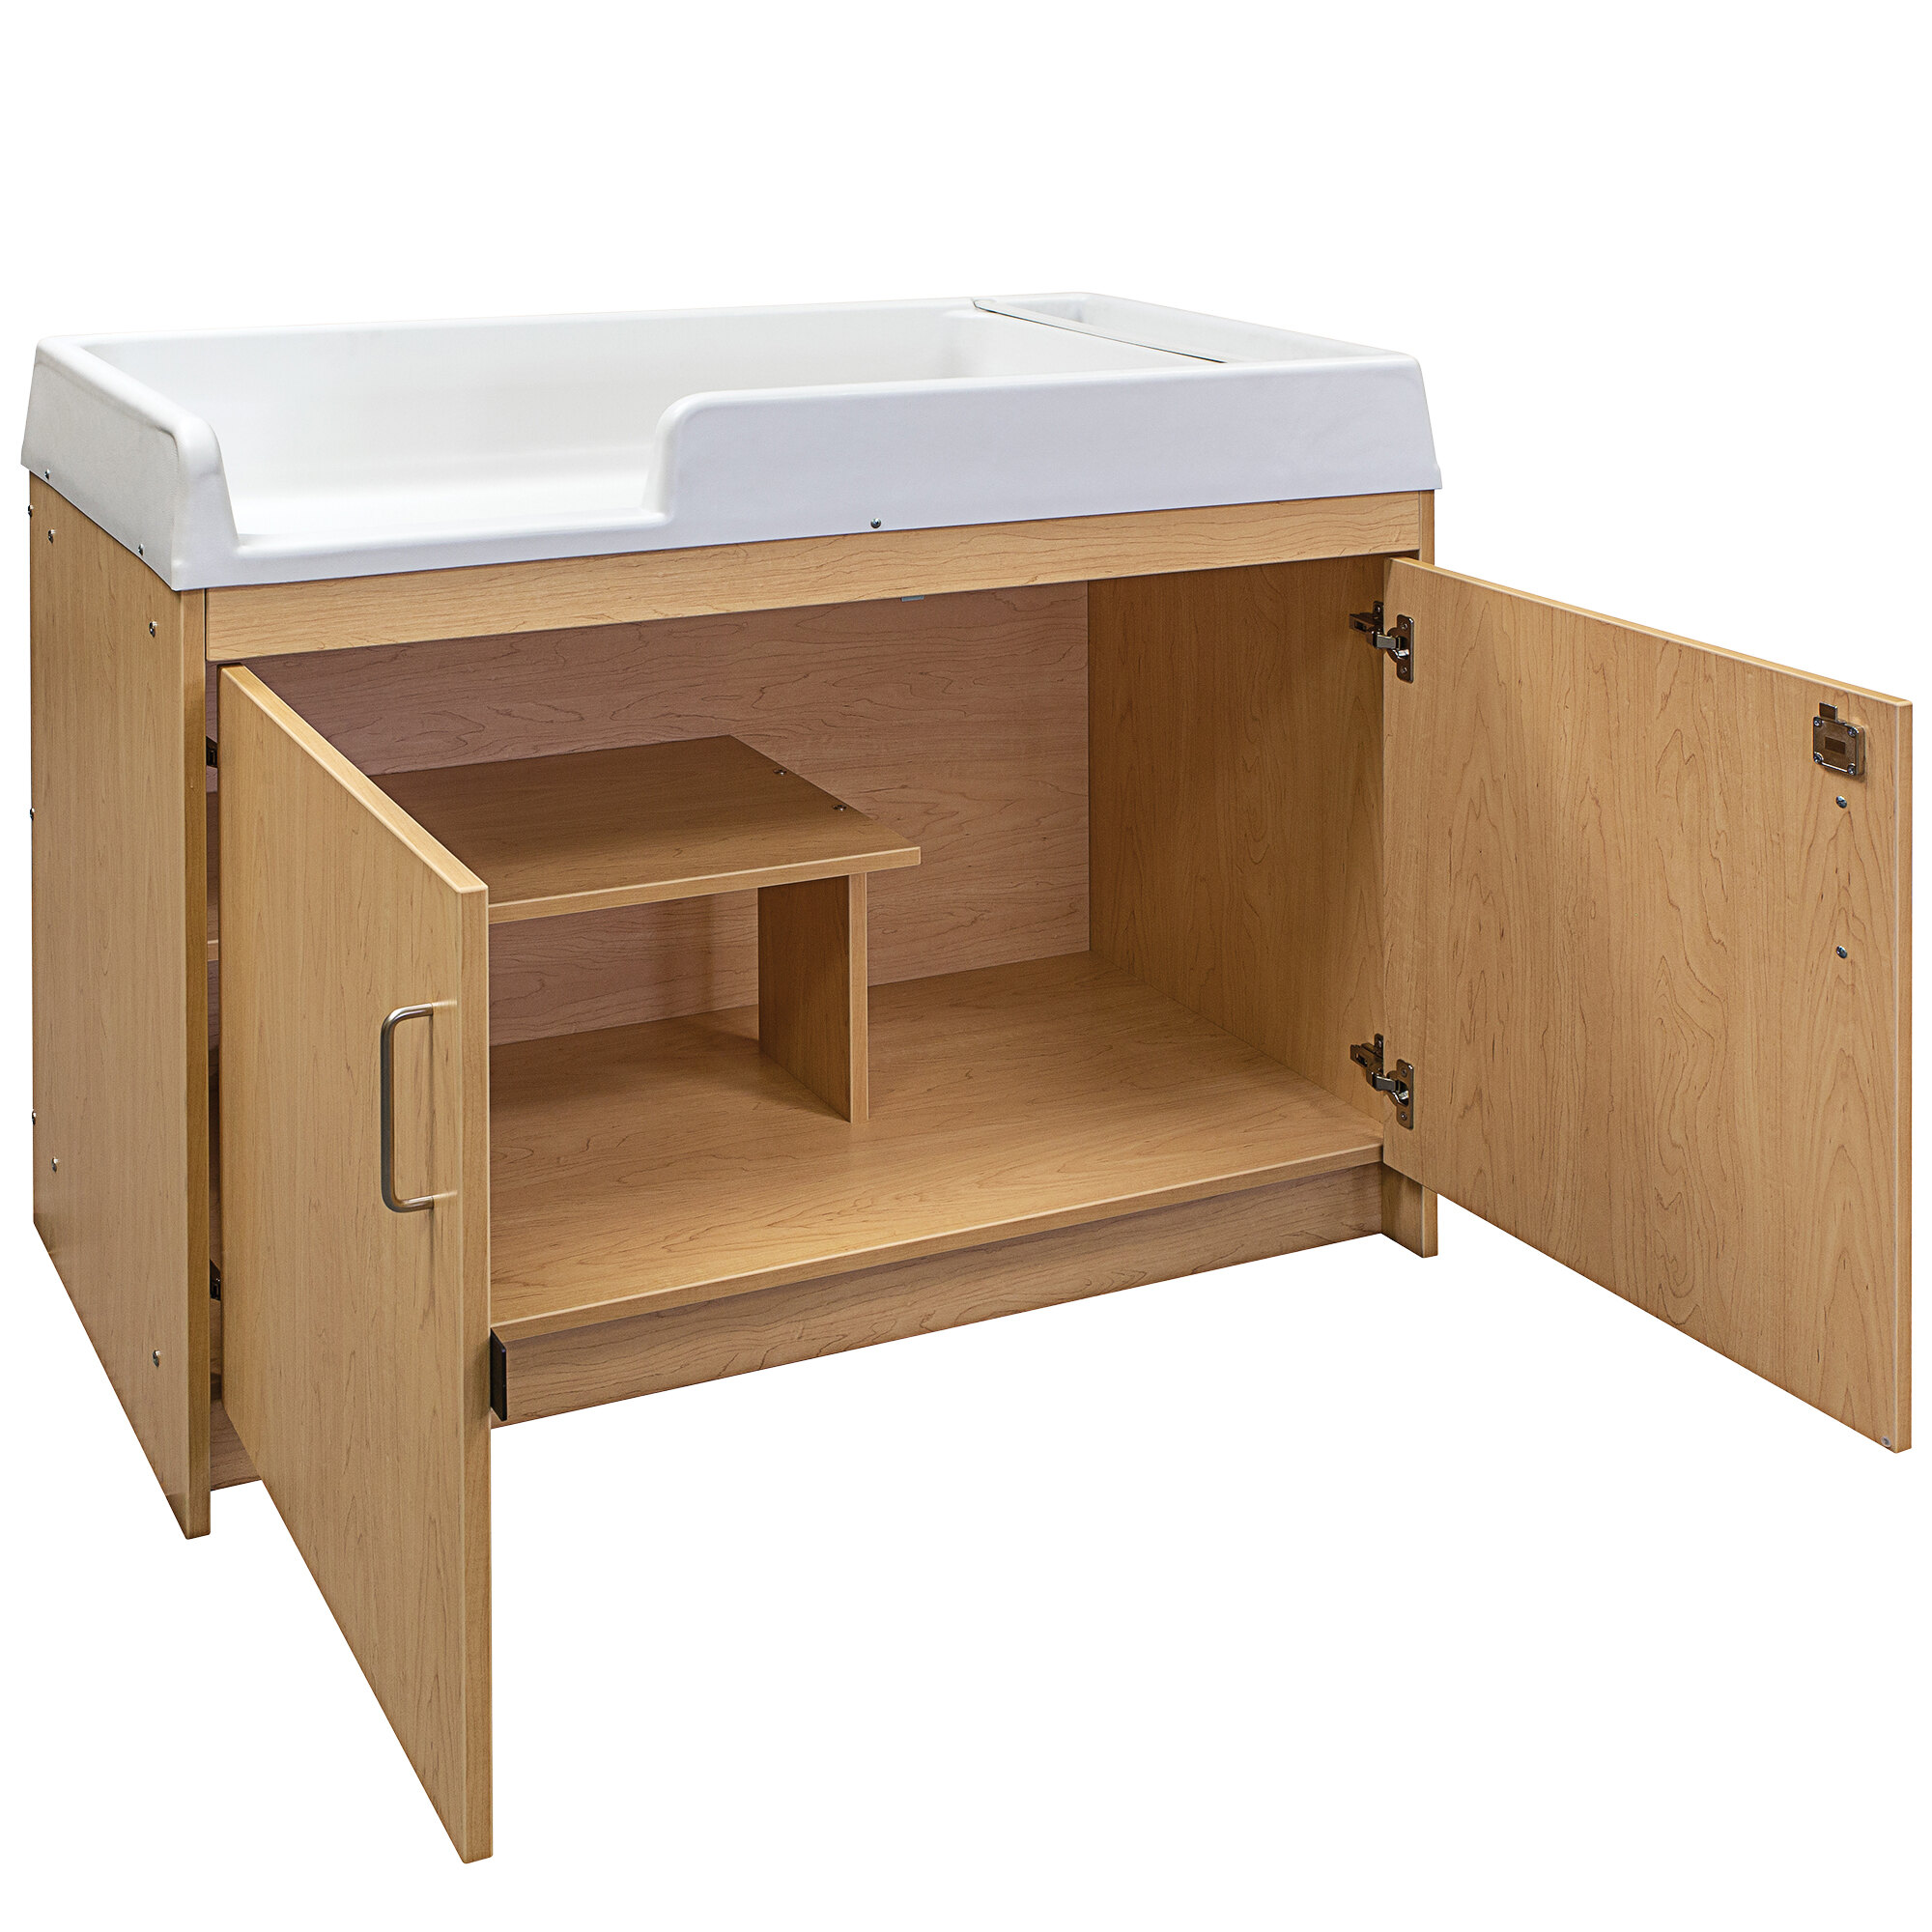 Tot Mate TM8530A.S2222 Maple Laminate Infant Changing Table - 47